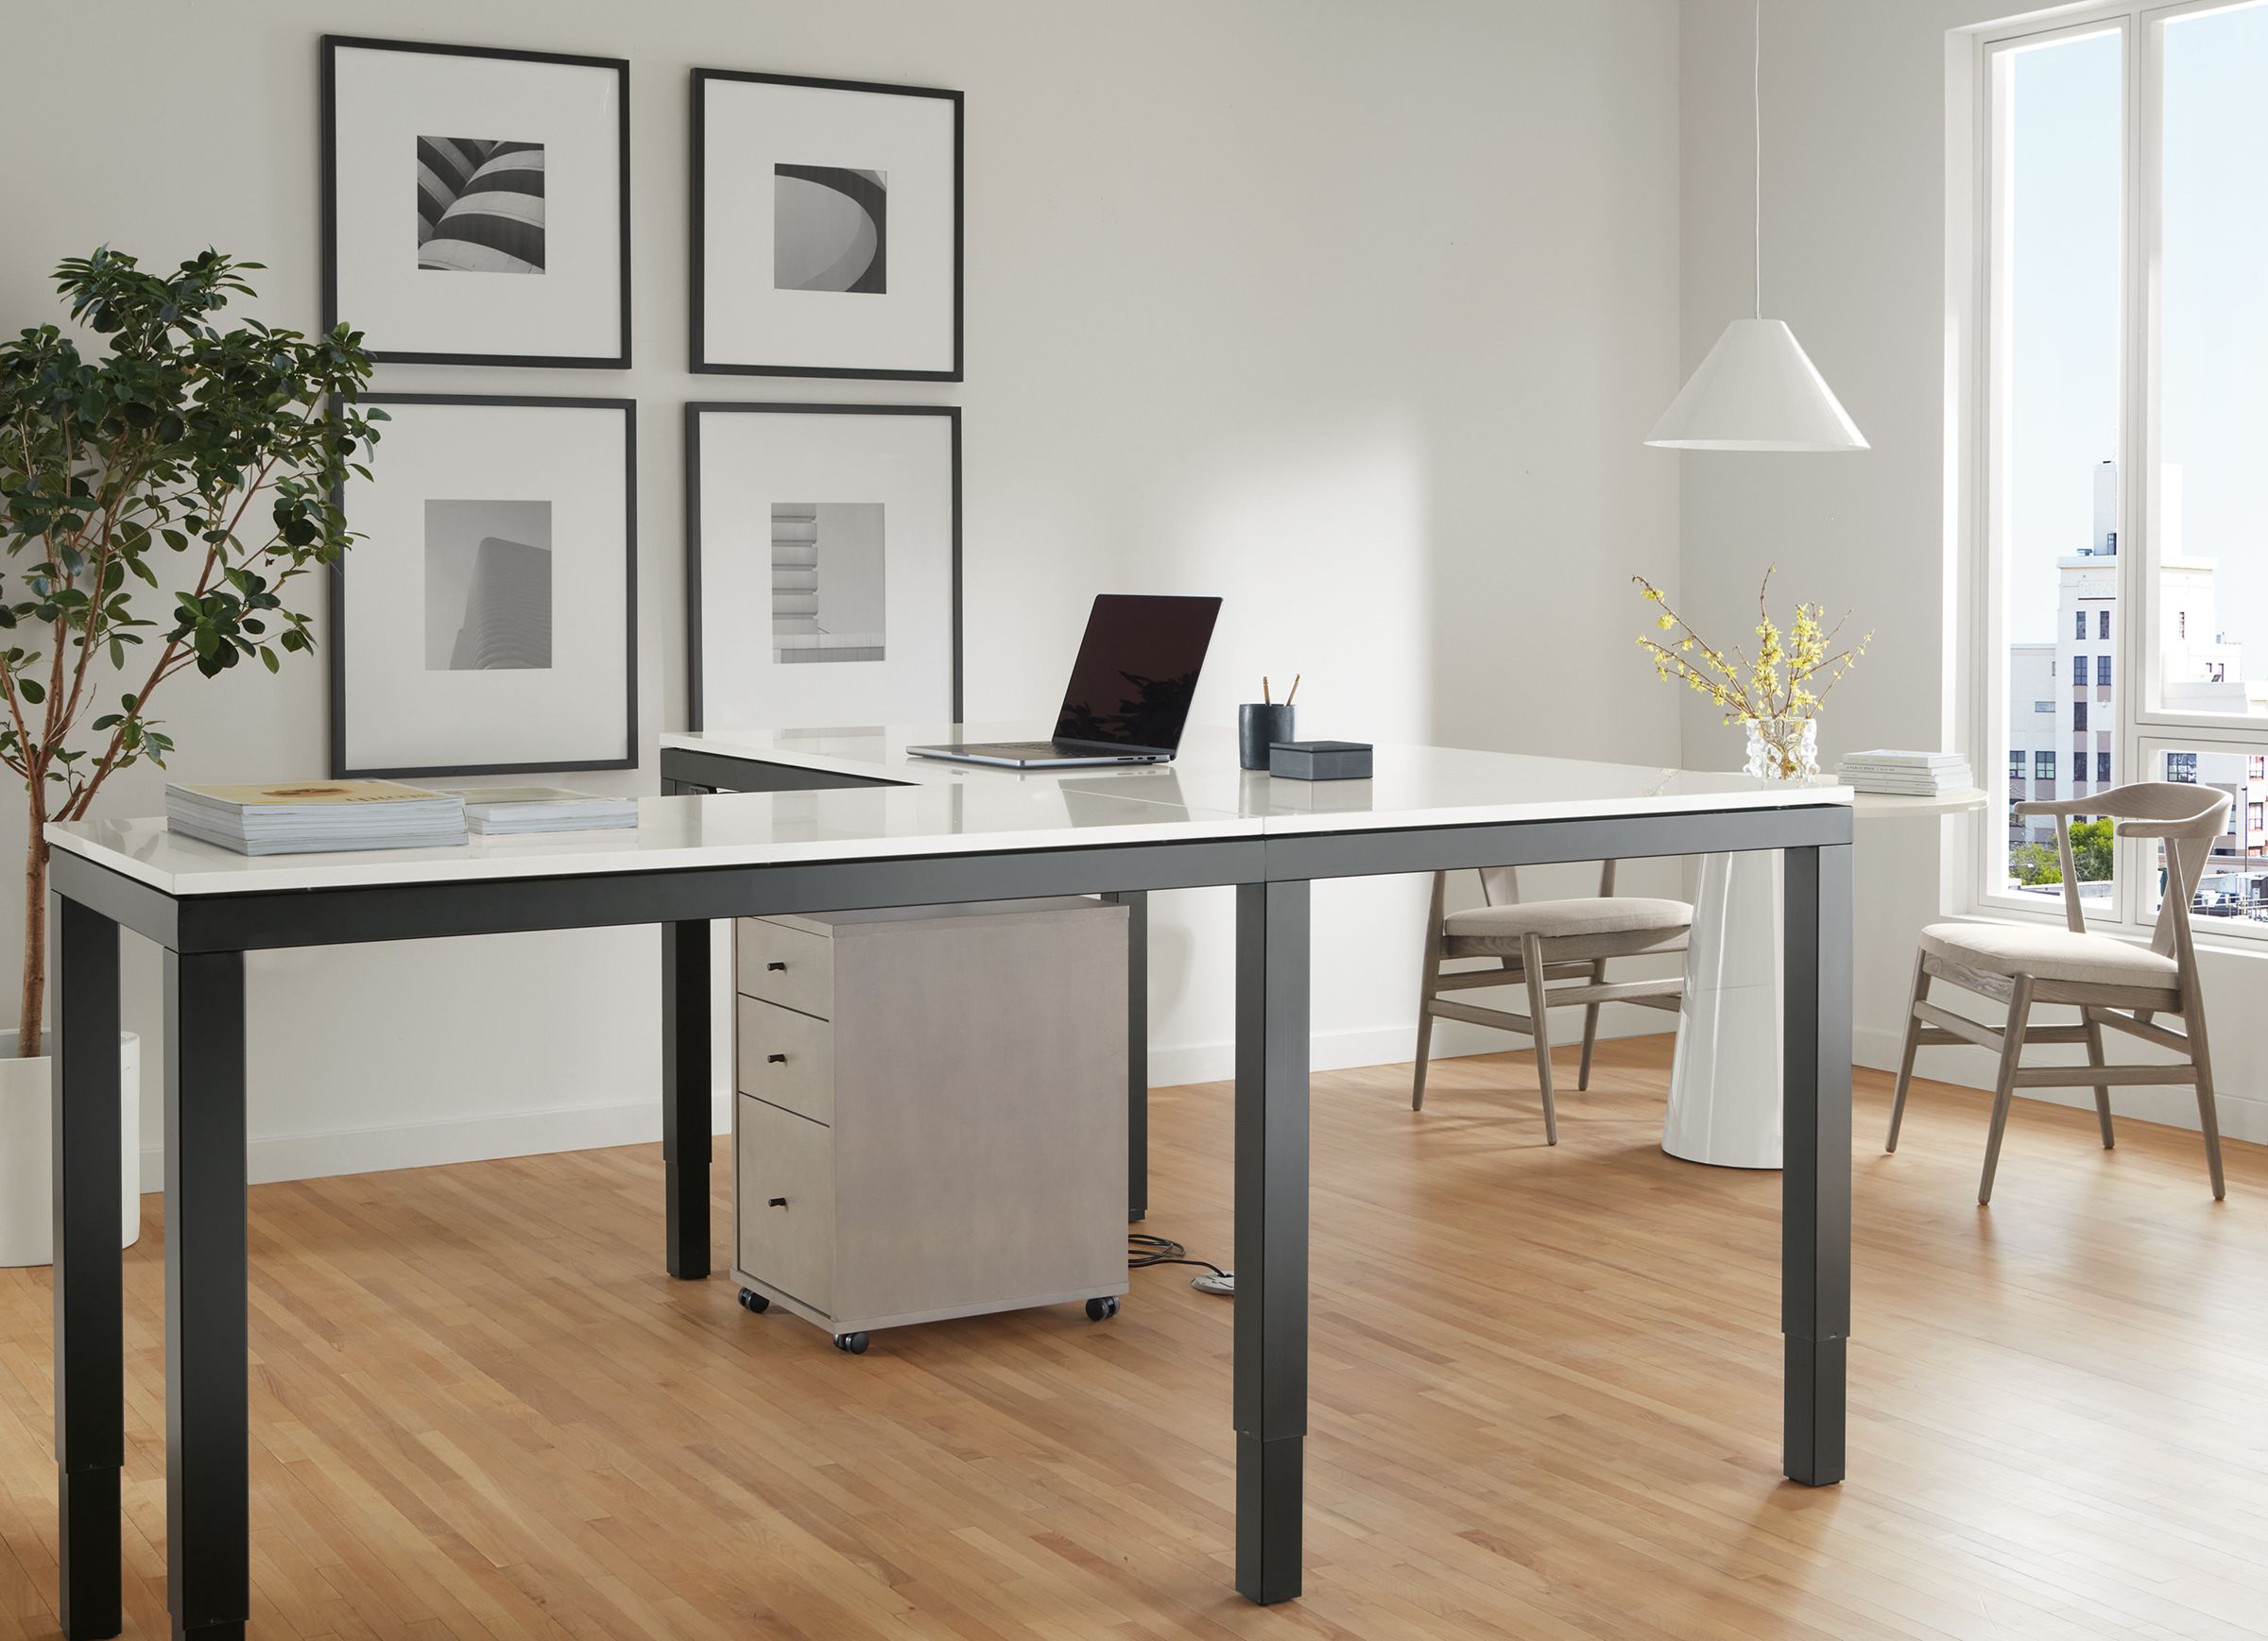 Office area with Parsons Adjustable height standing desk in graphite and light grey quartz top in standing position with sequel file cabinet in shell.